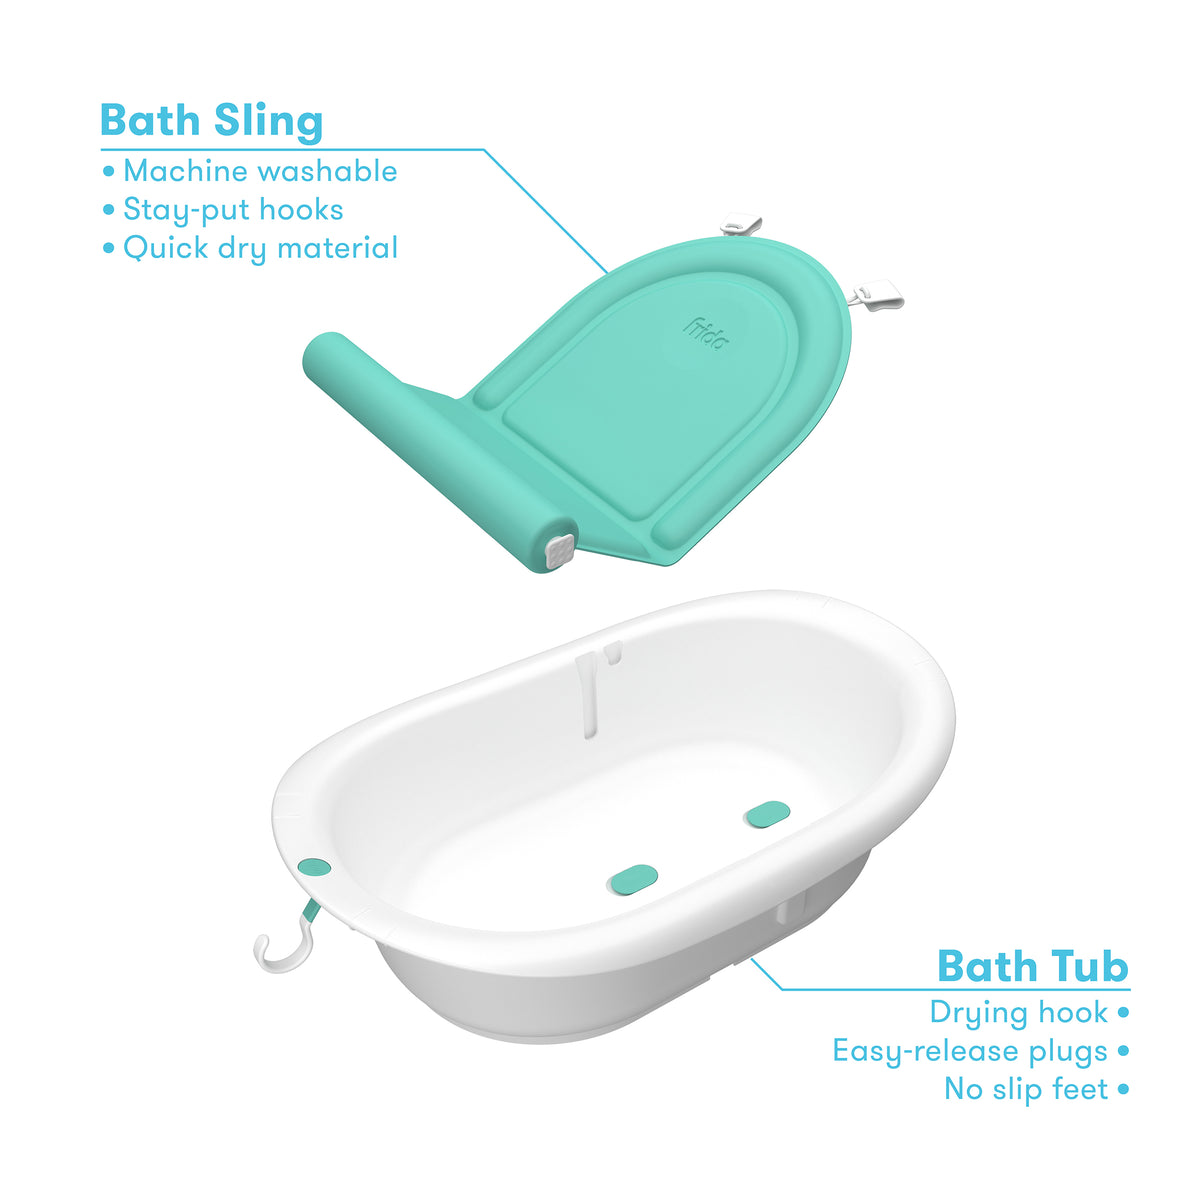 4-in-1 Grow-With-Me Bath Tub